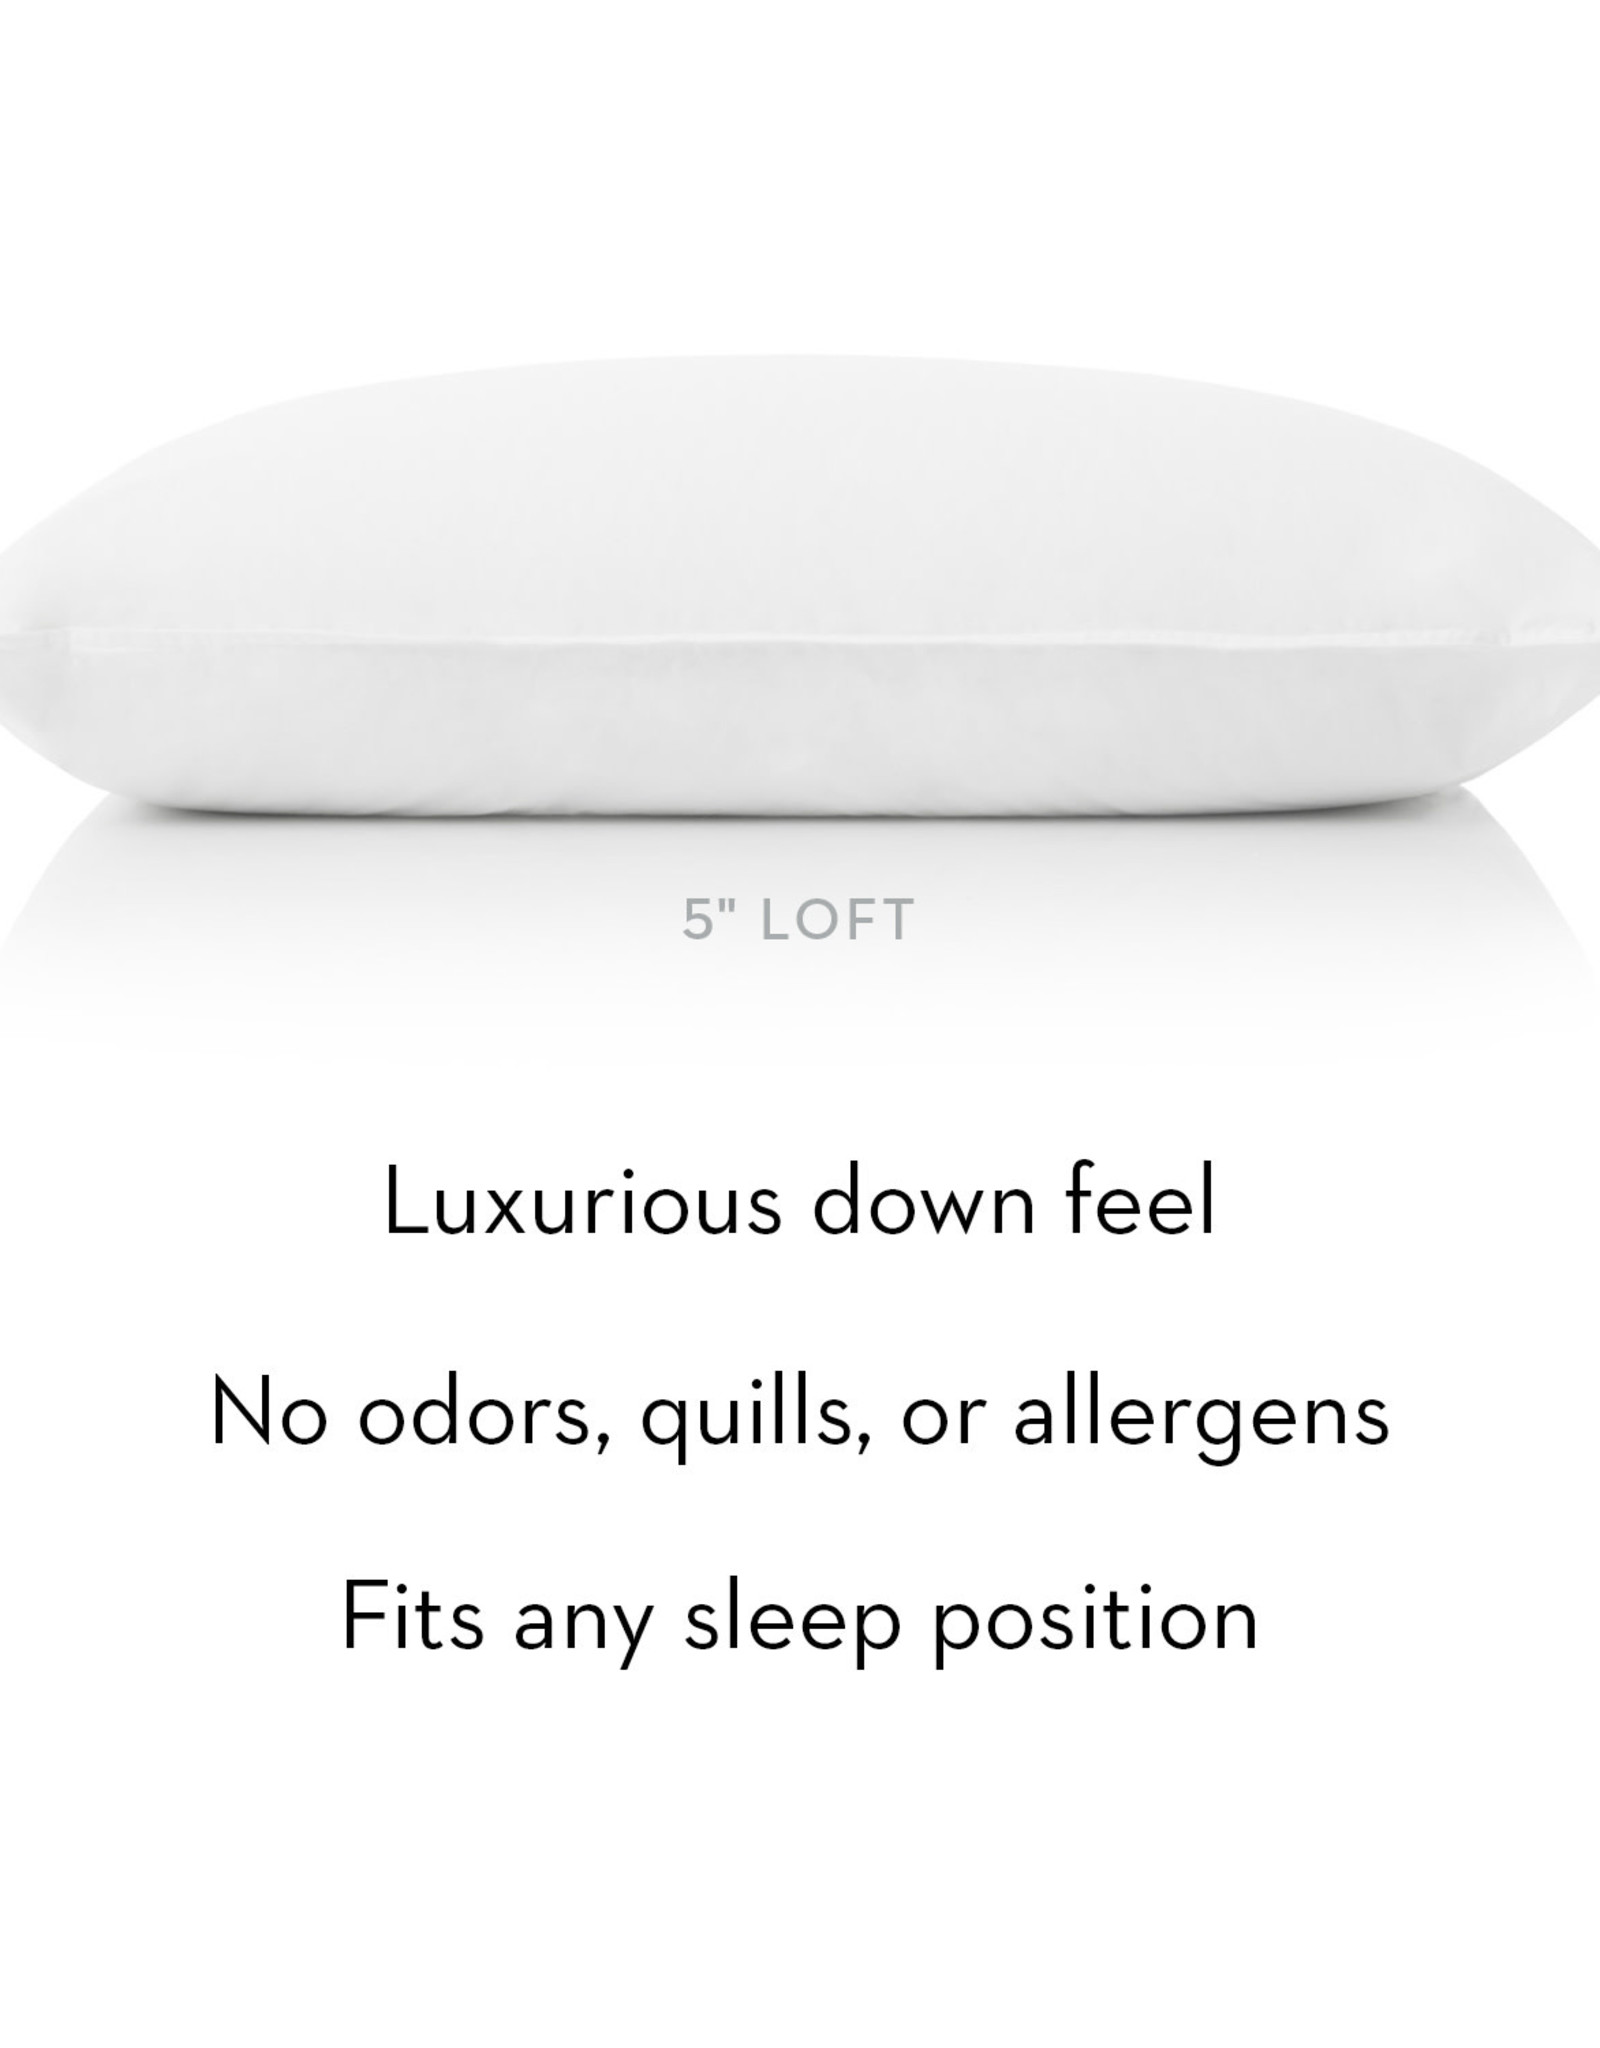 Gelled Microfiber Pillow (For Stomach Sleepers)